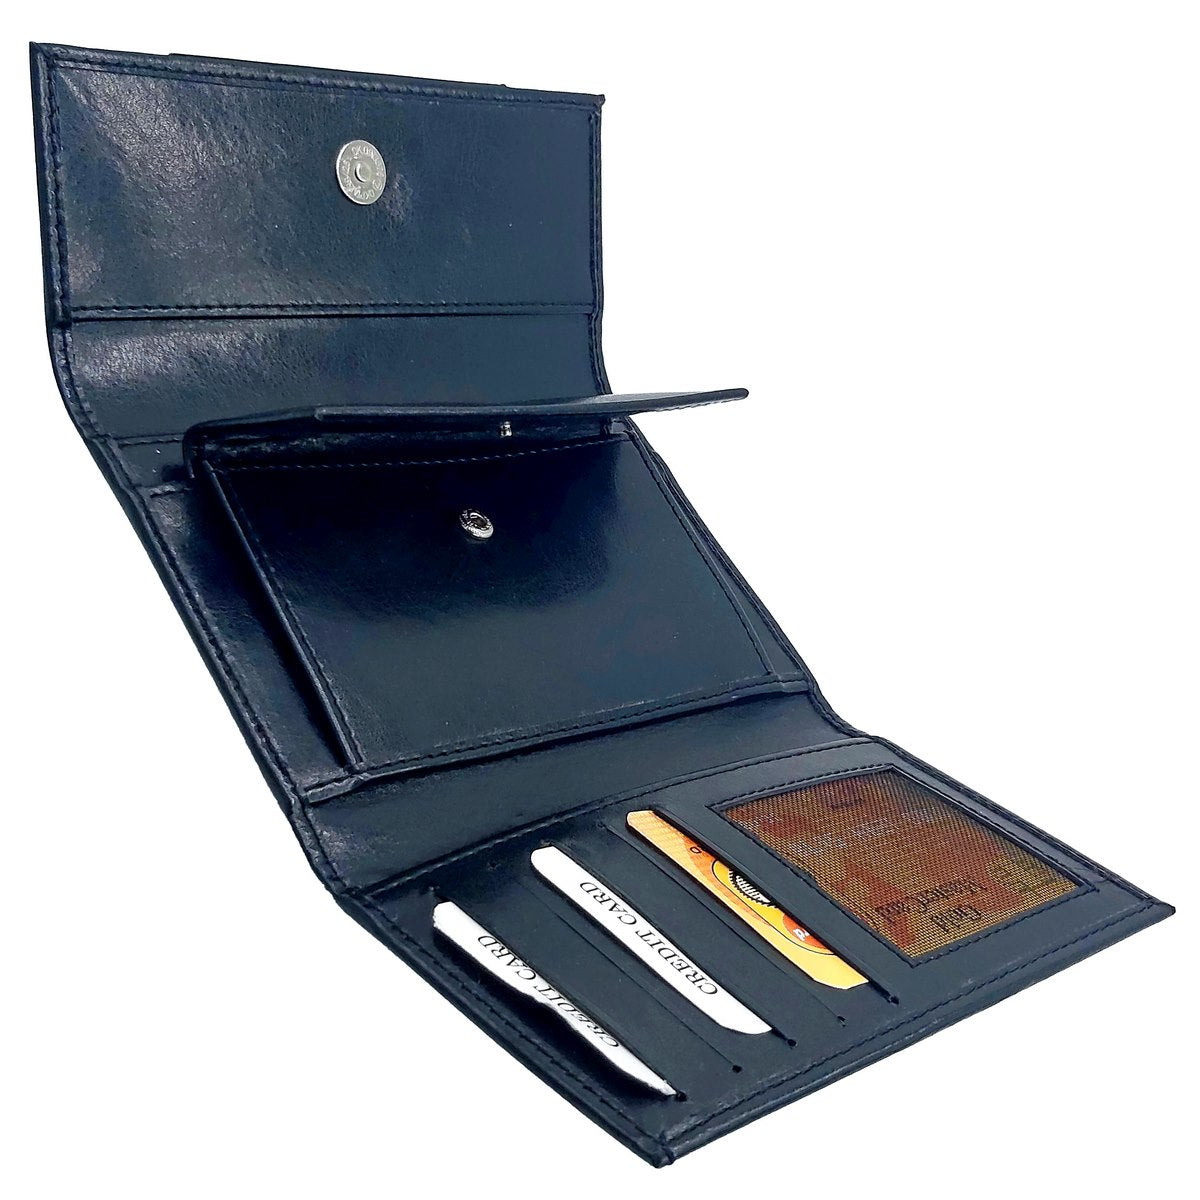 Black Leather Ladies Wallet - For Employee, Corporate, Client or Dealer Gifting, Promotional Freebie, Return Gift JALW128BK